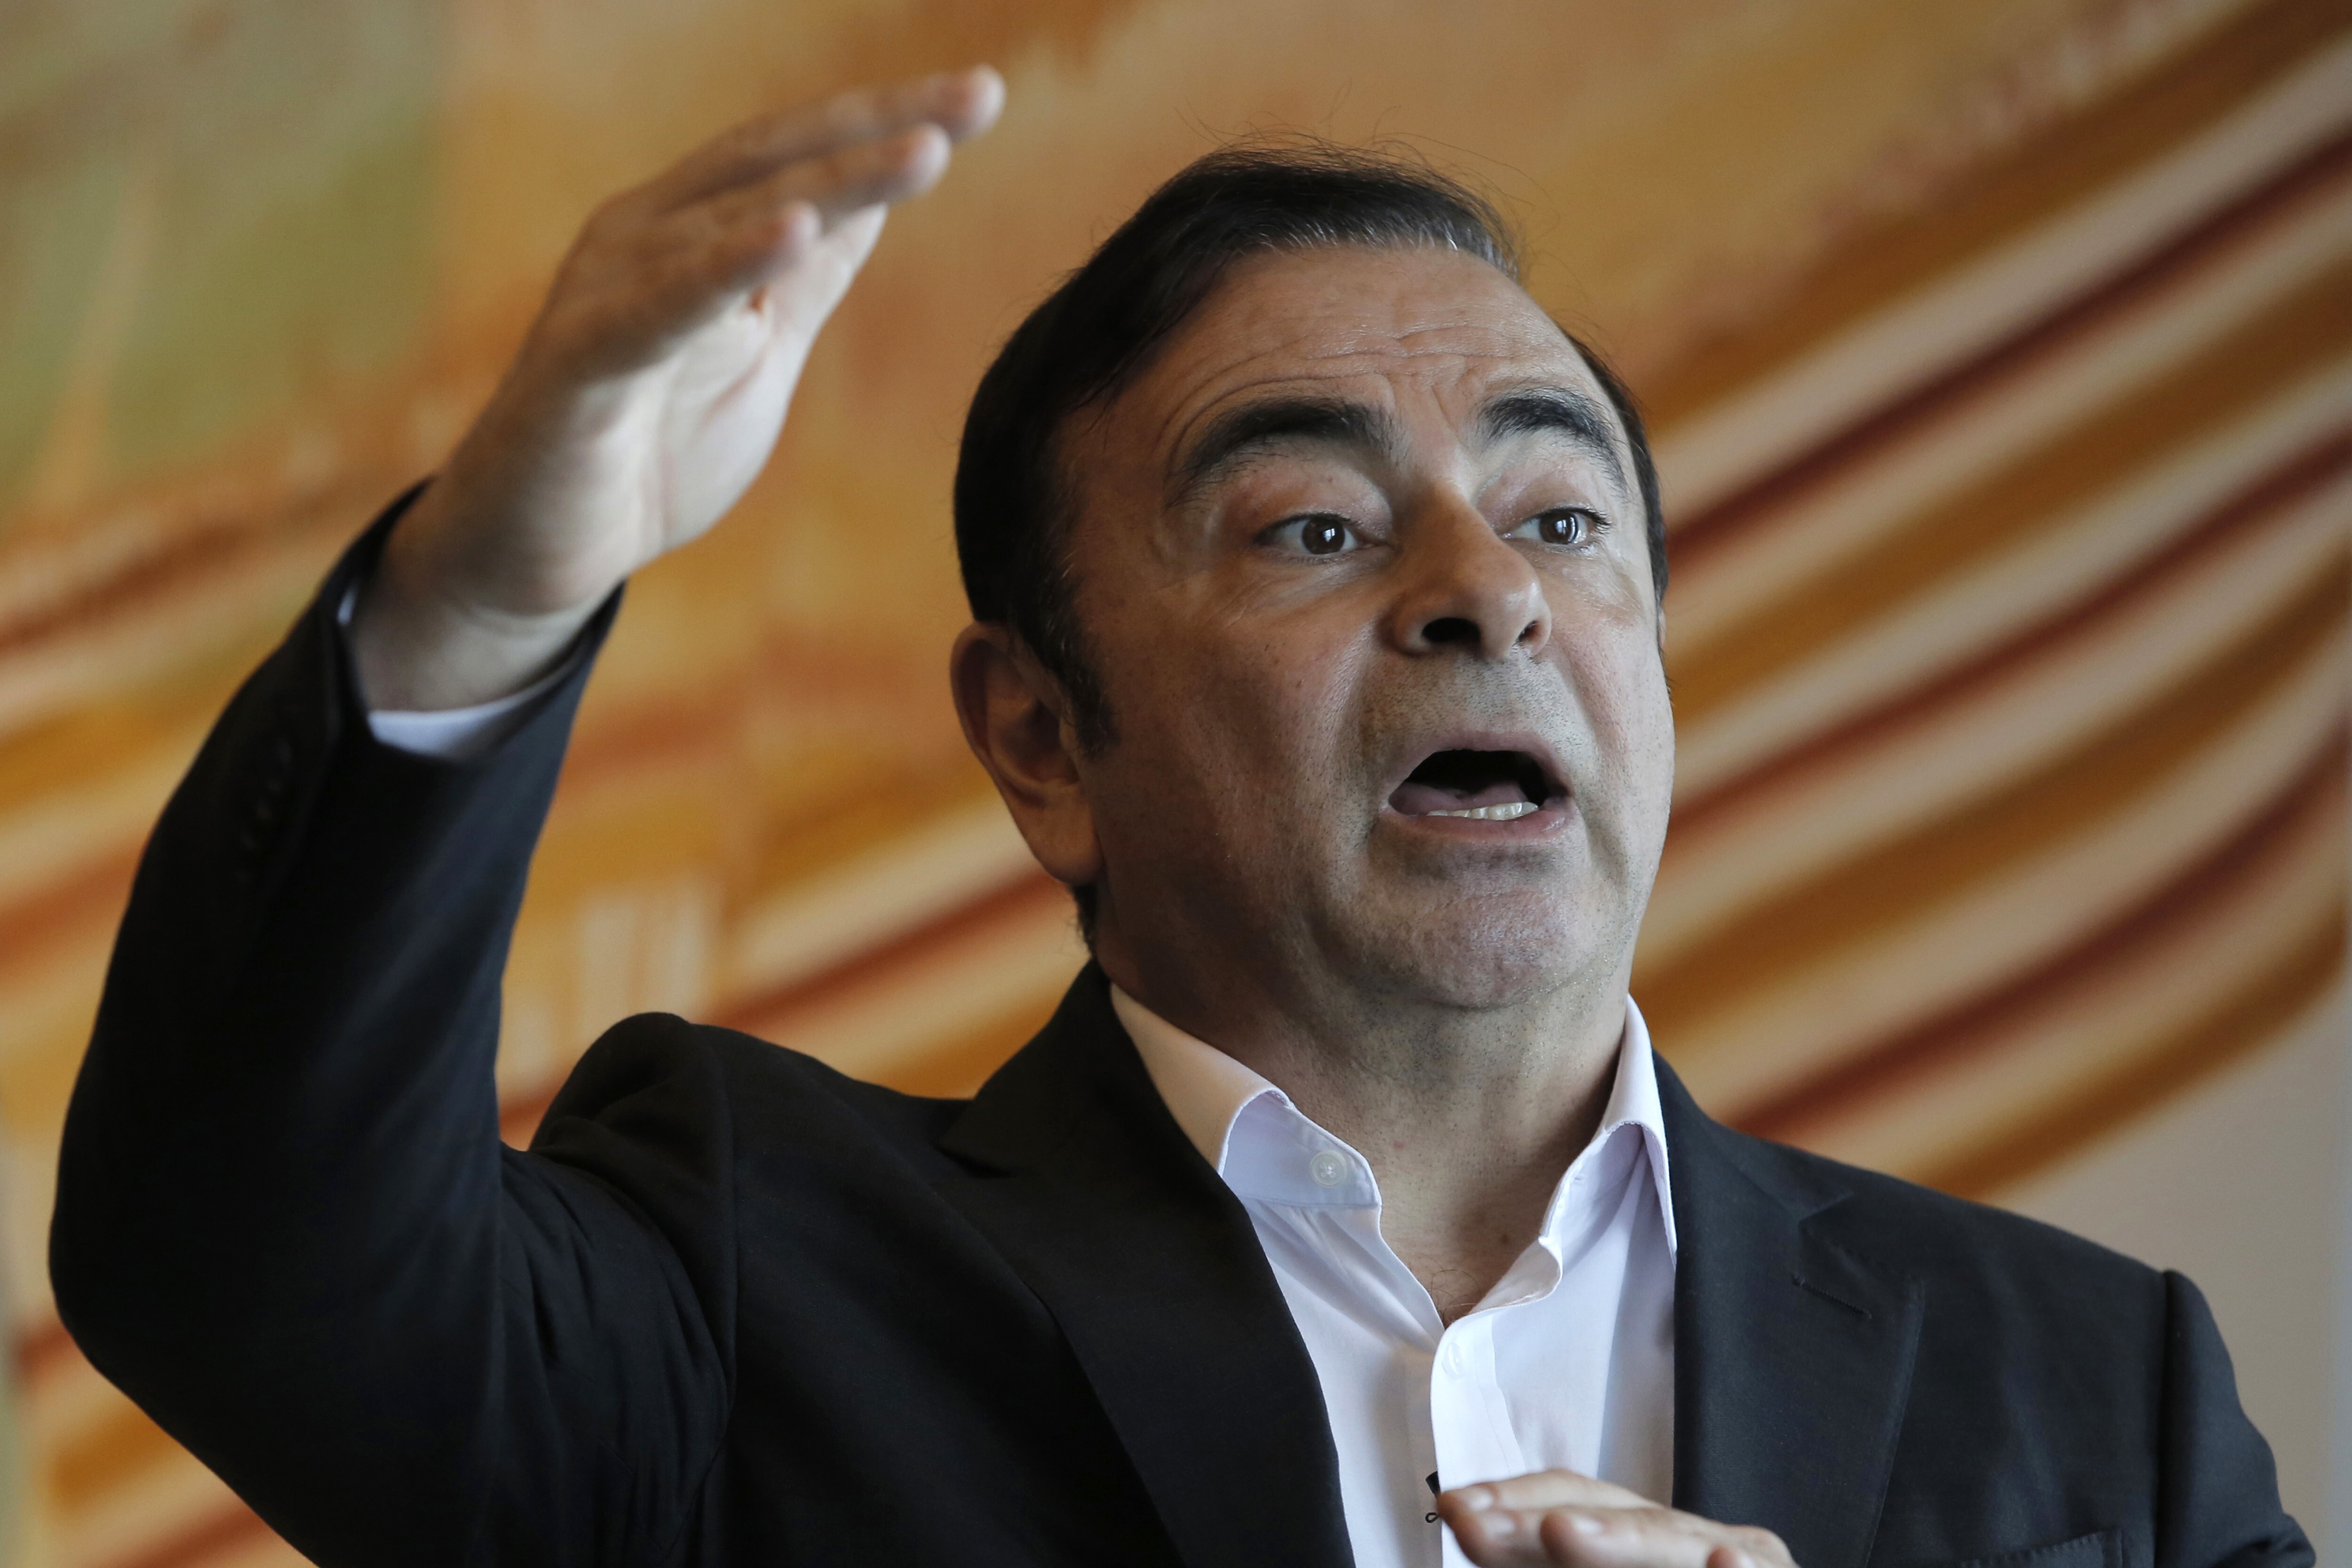 Carlos Ghosn, then the chairman of Nissan, speaks during an interview in Hong Kong in 2018. Photo: AP